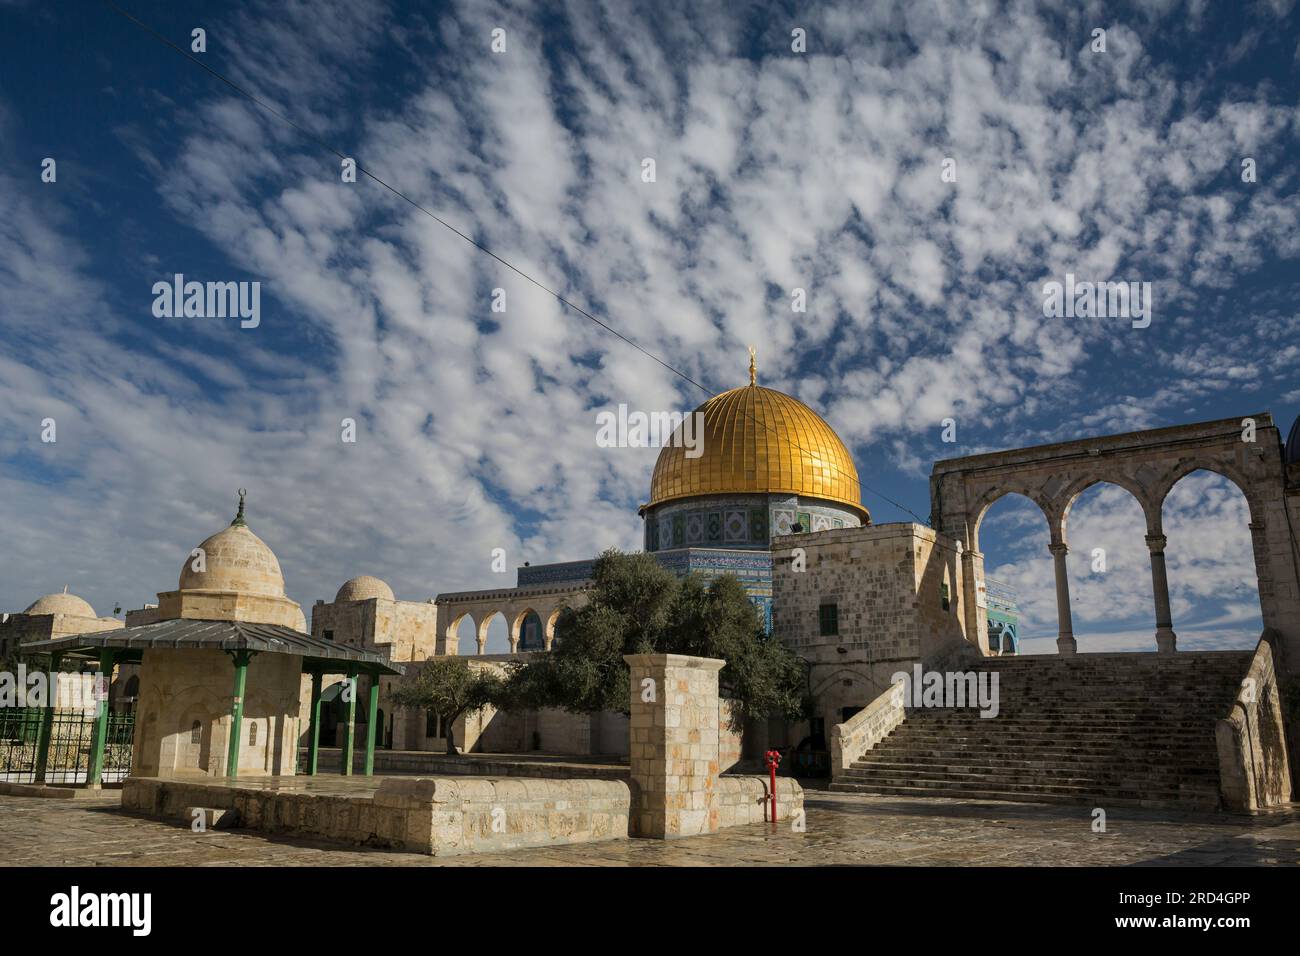 Horizontal lateral view of the Dome of the Rock beside three south-western arches in the Temple Mount of the Old City of Jerusalem, Israel Stock Photo